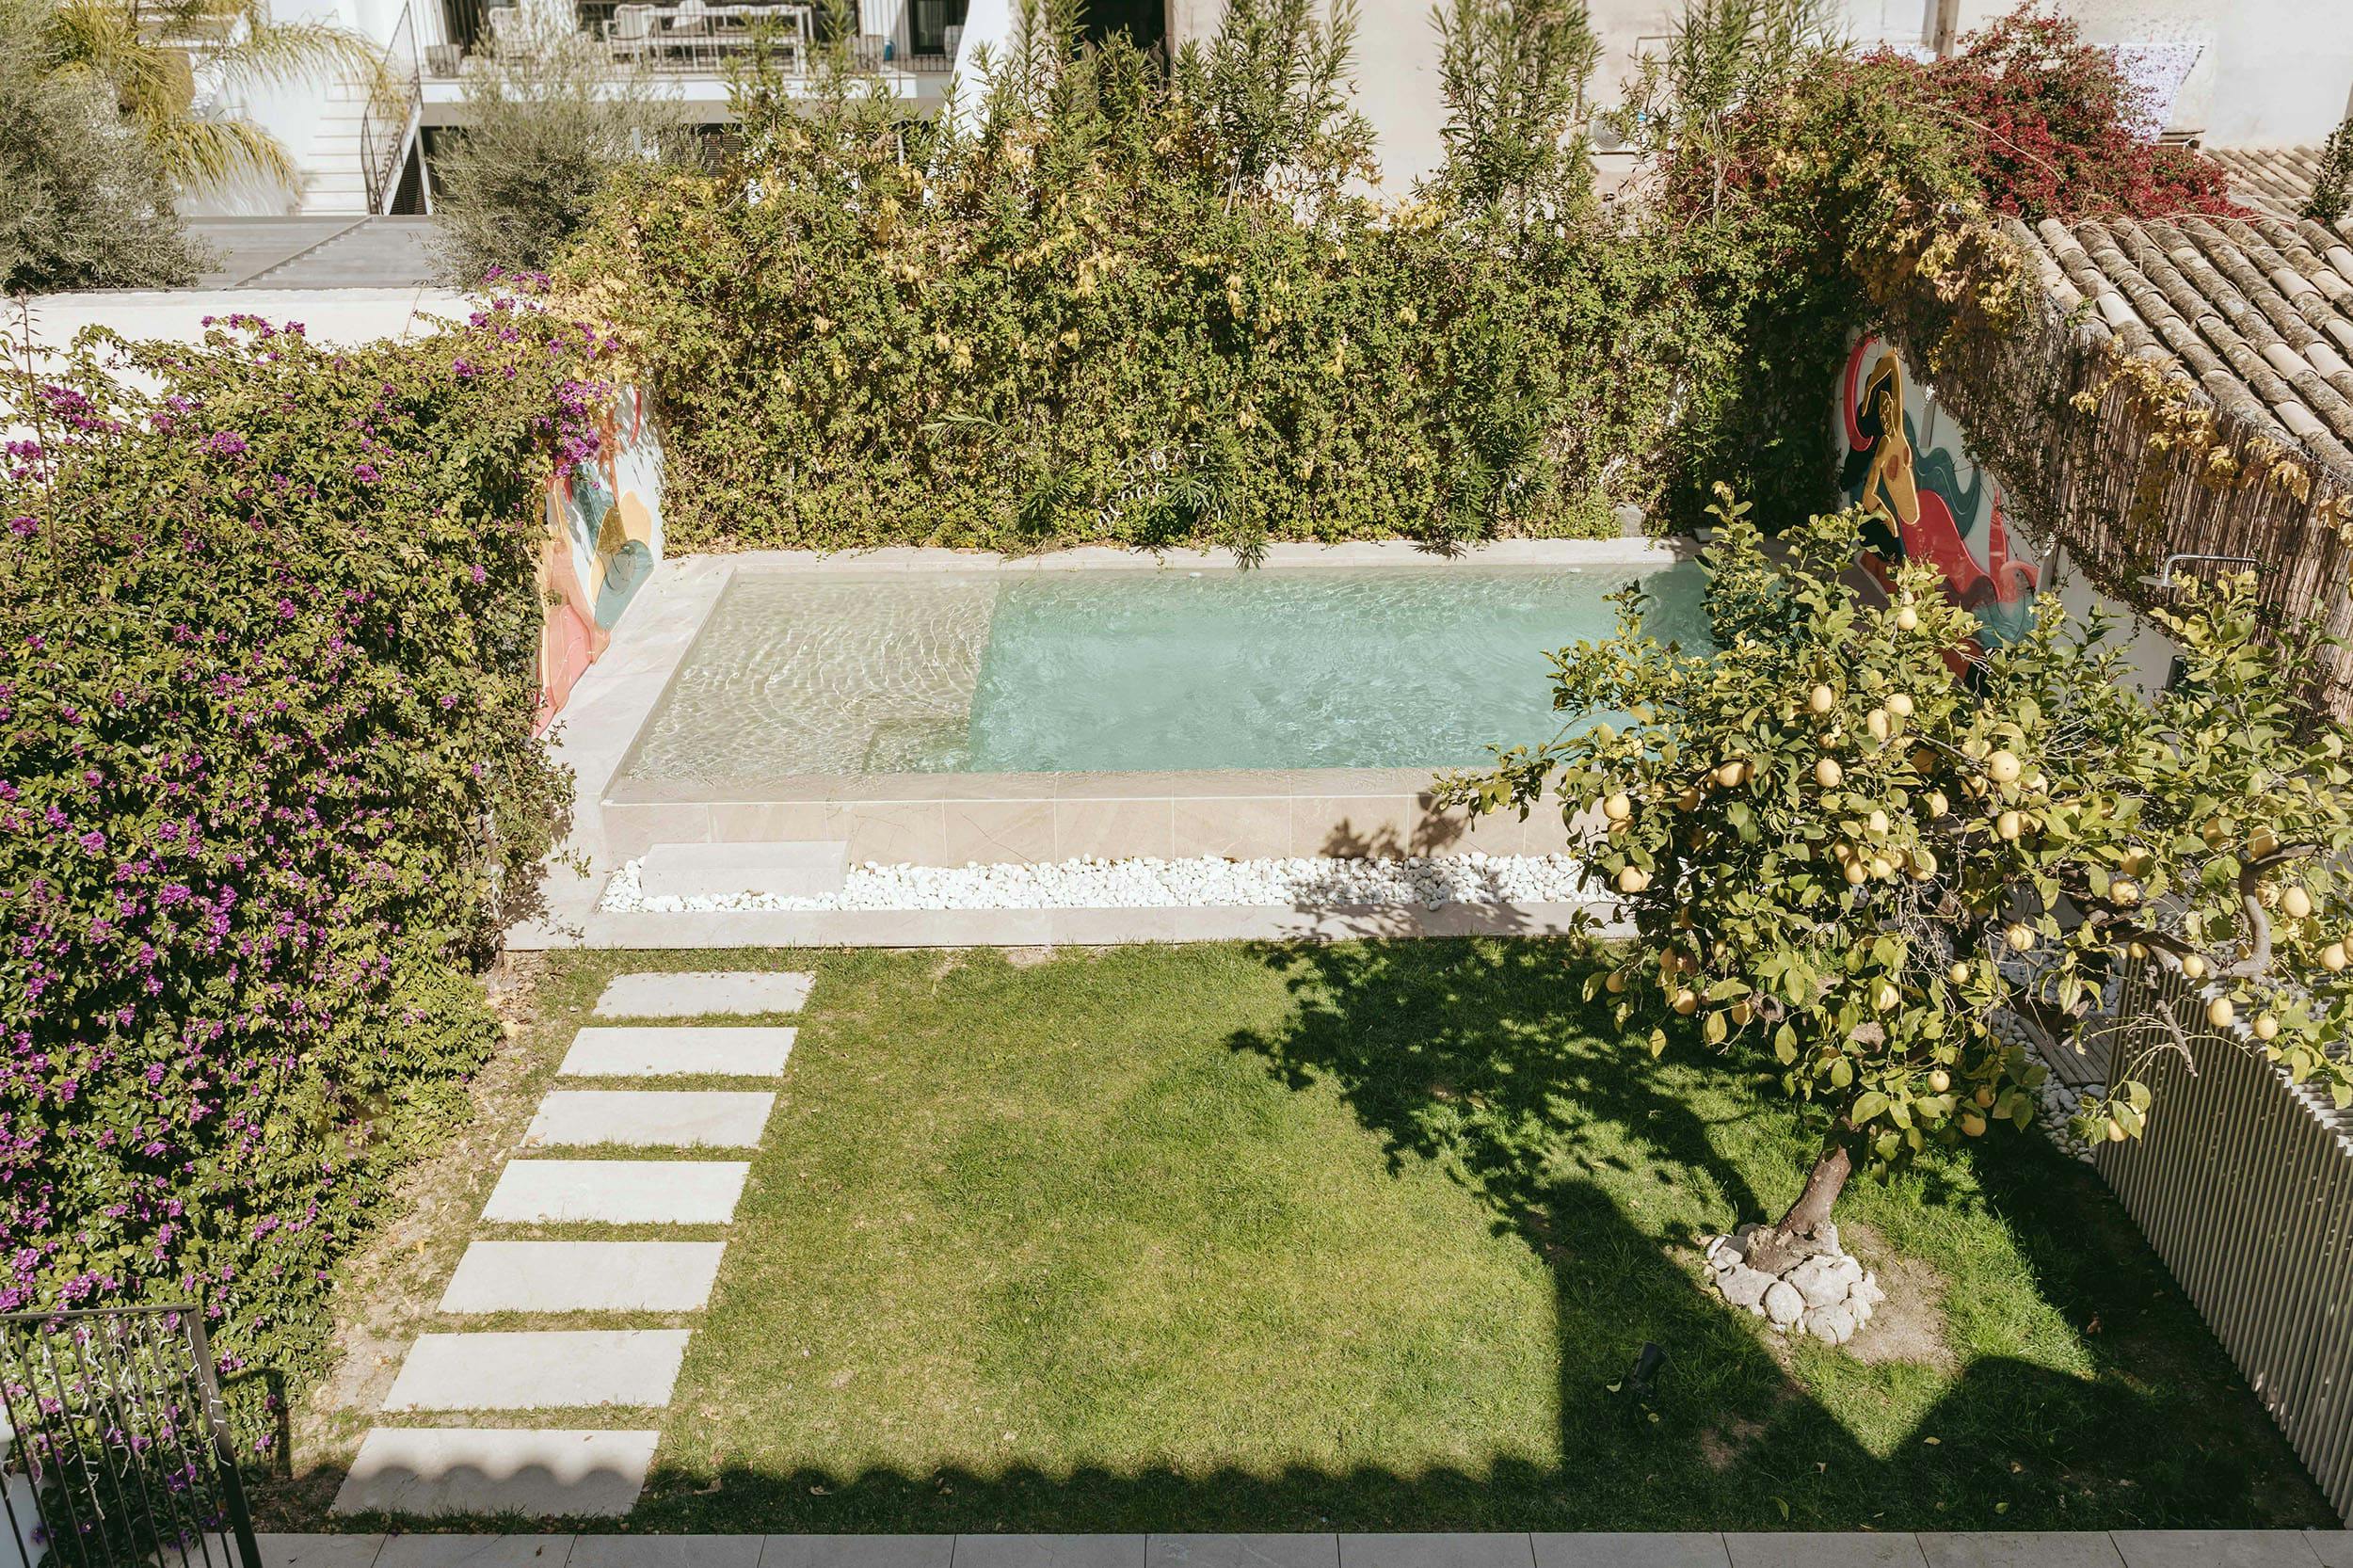 The image features a large, well-maintained backyard with a swimming pool, a patio, a garden, and a house.